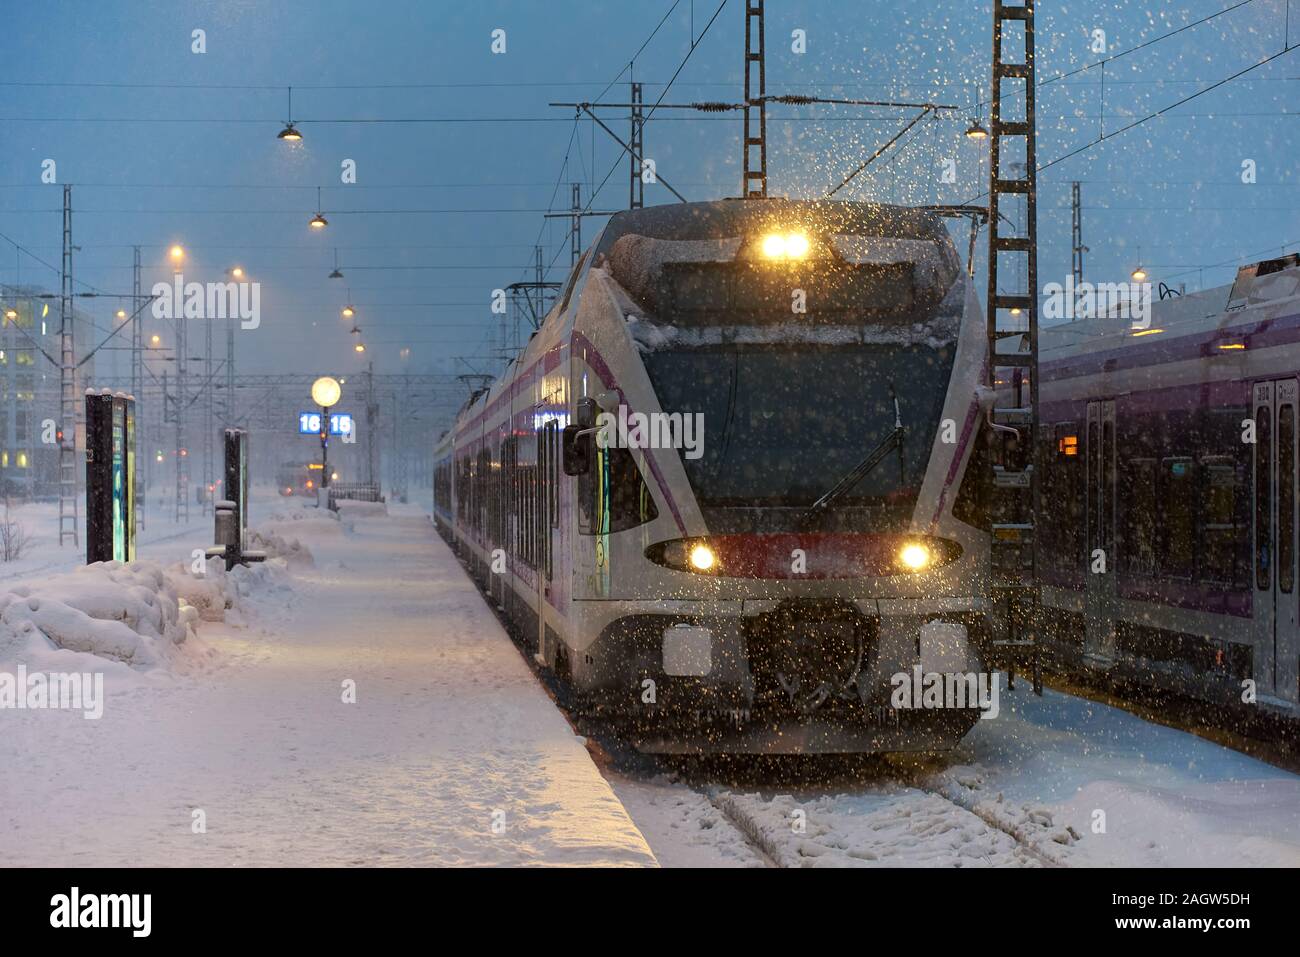 Helsinki, Finland - February 6, 2019:  local commuter train arriving at the Helsinki central railway station in heavy snow storm just before dawn in d Stock Photo